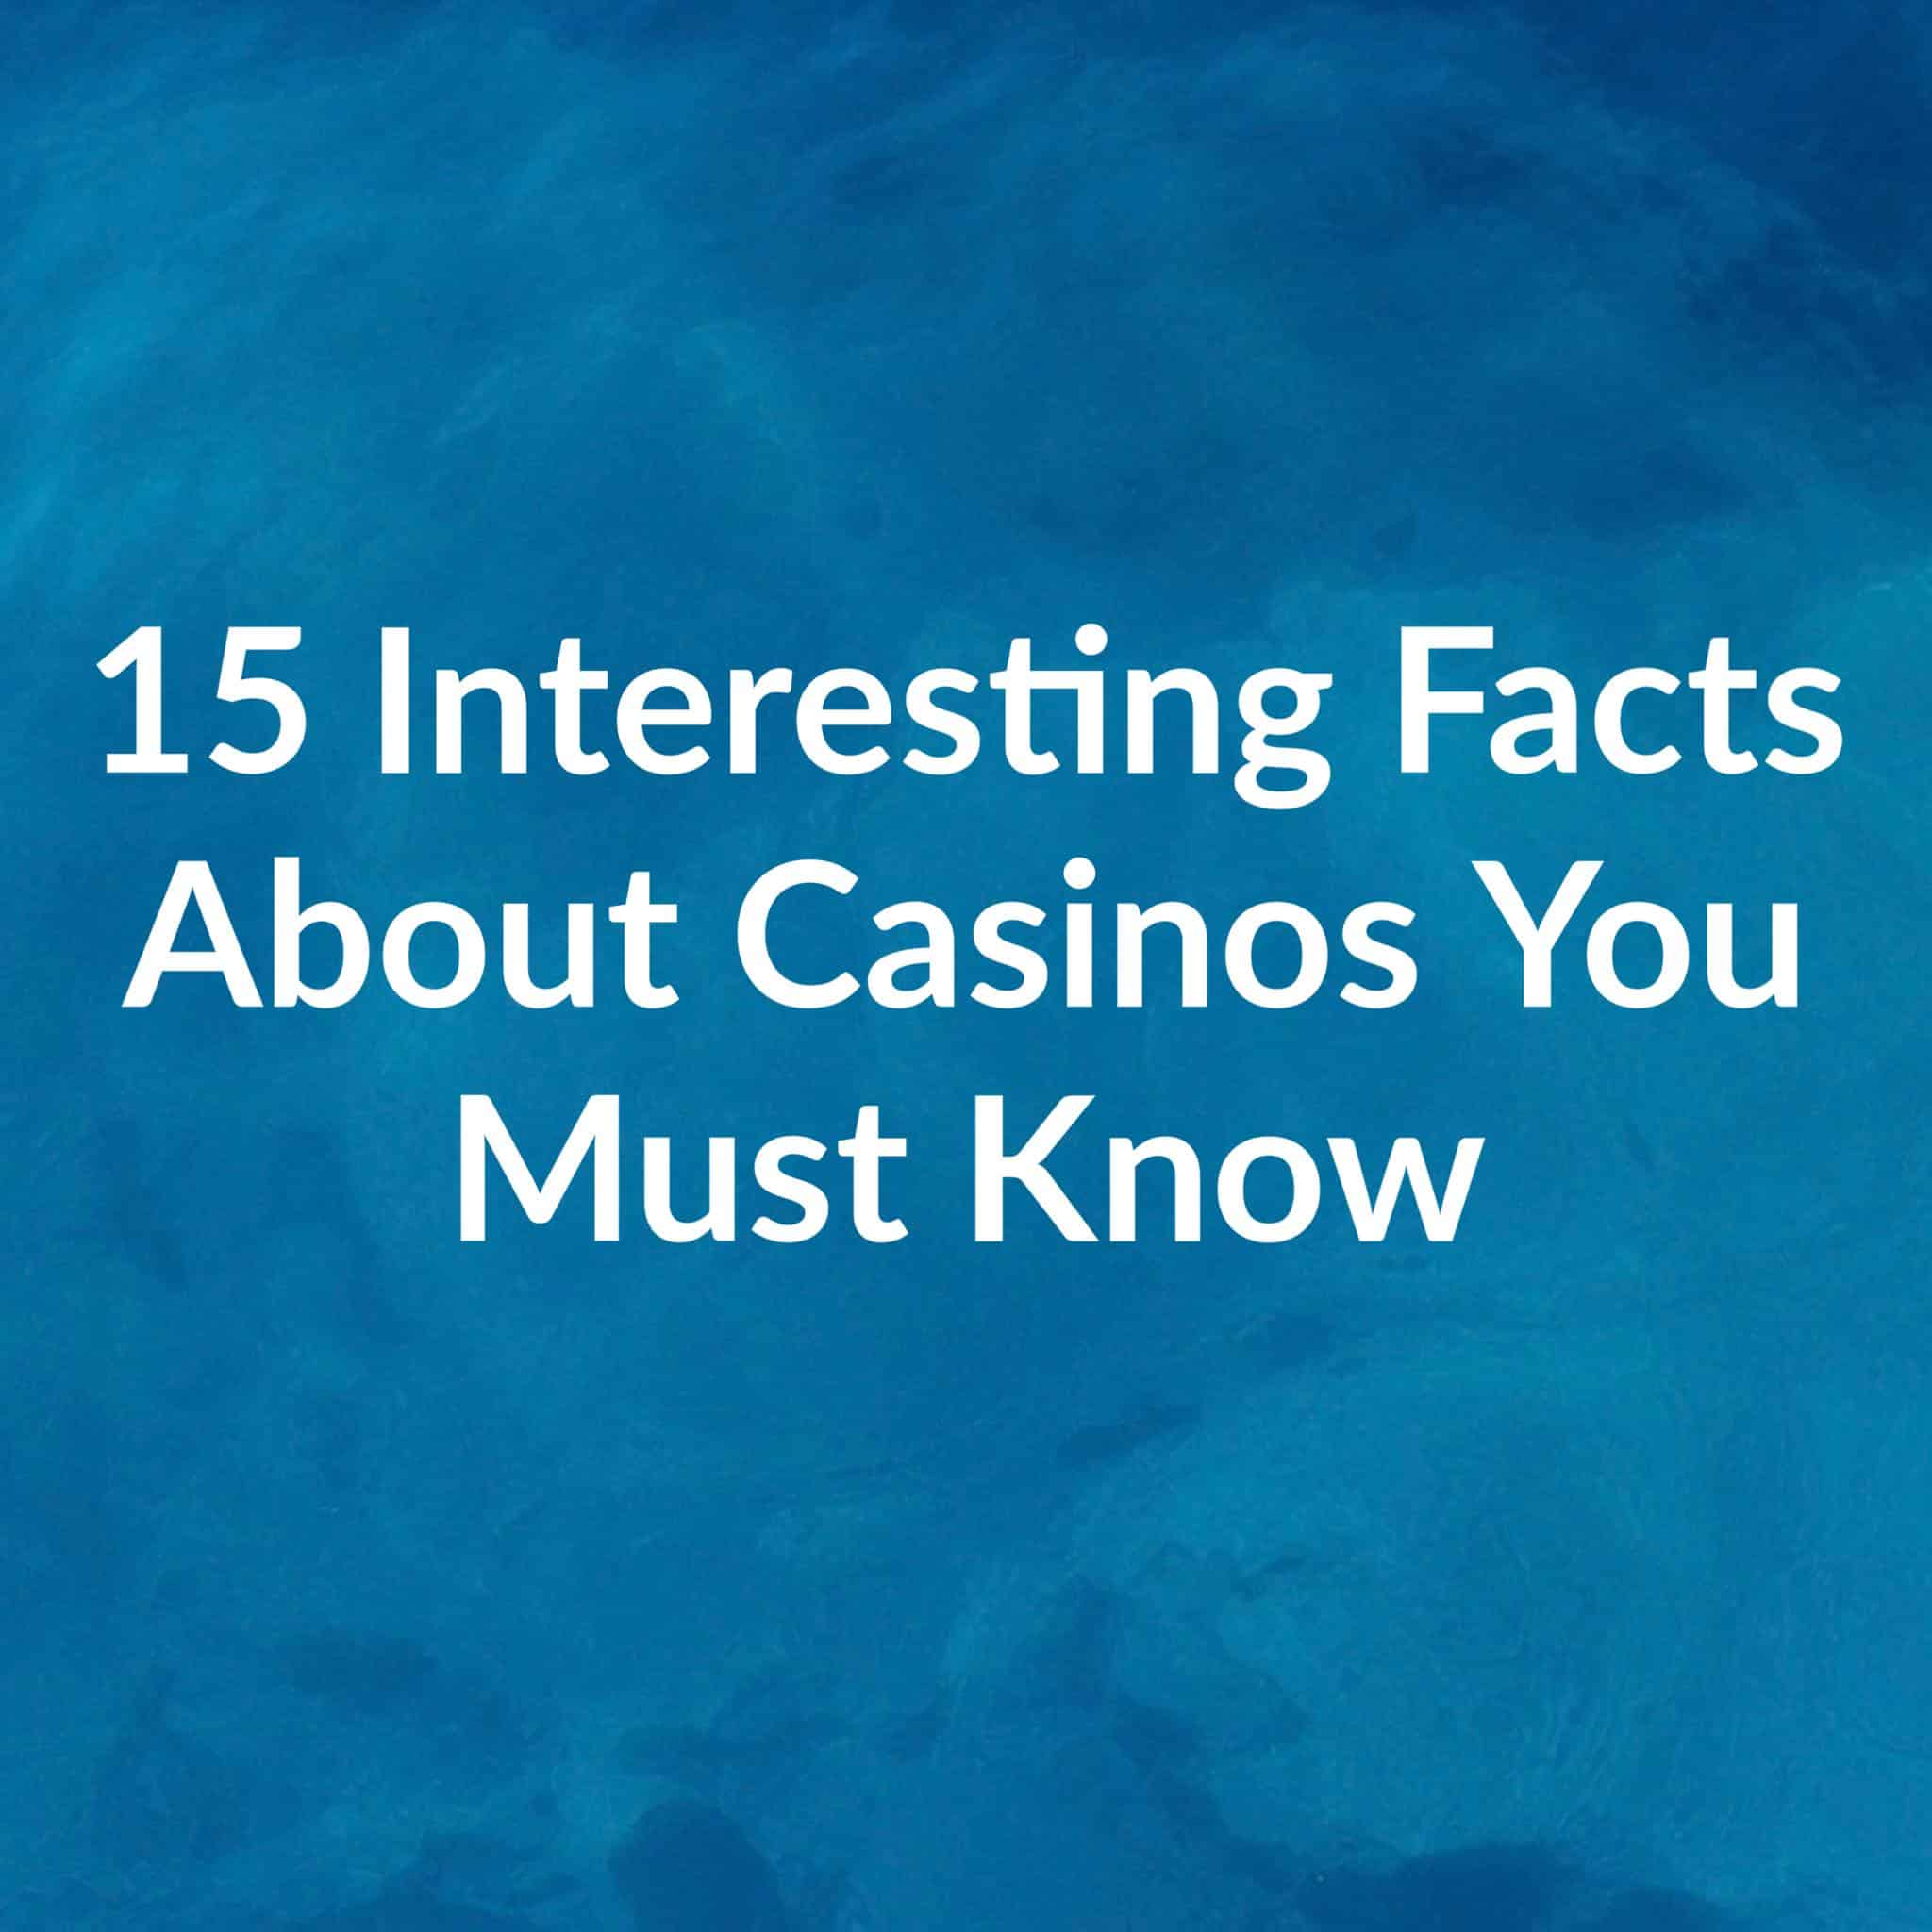 15 interesting facts about casinos you must know